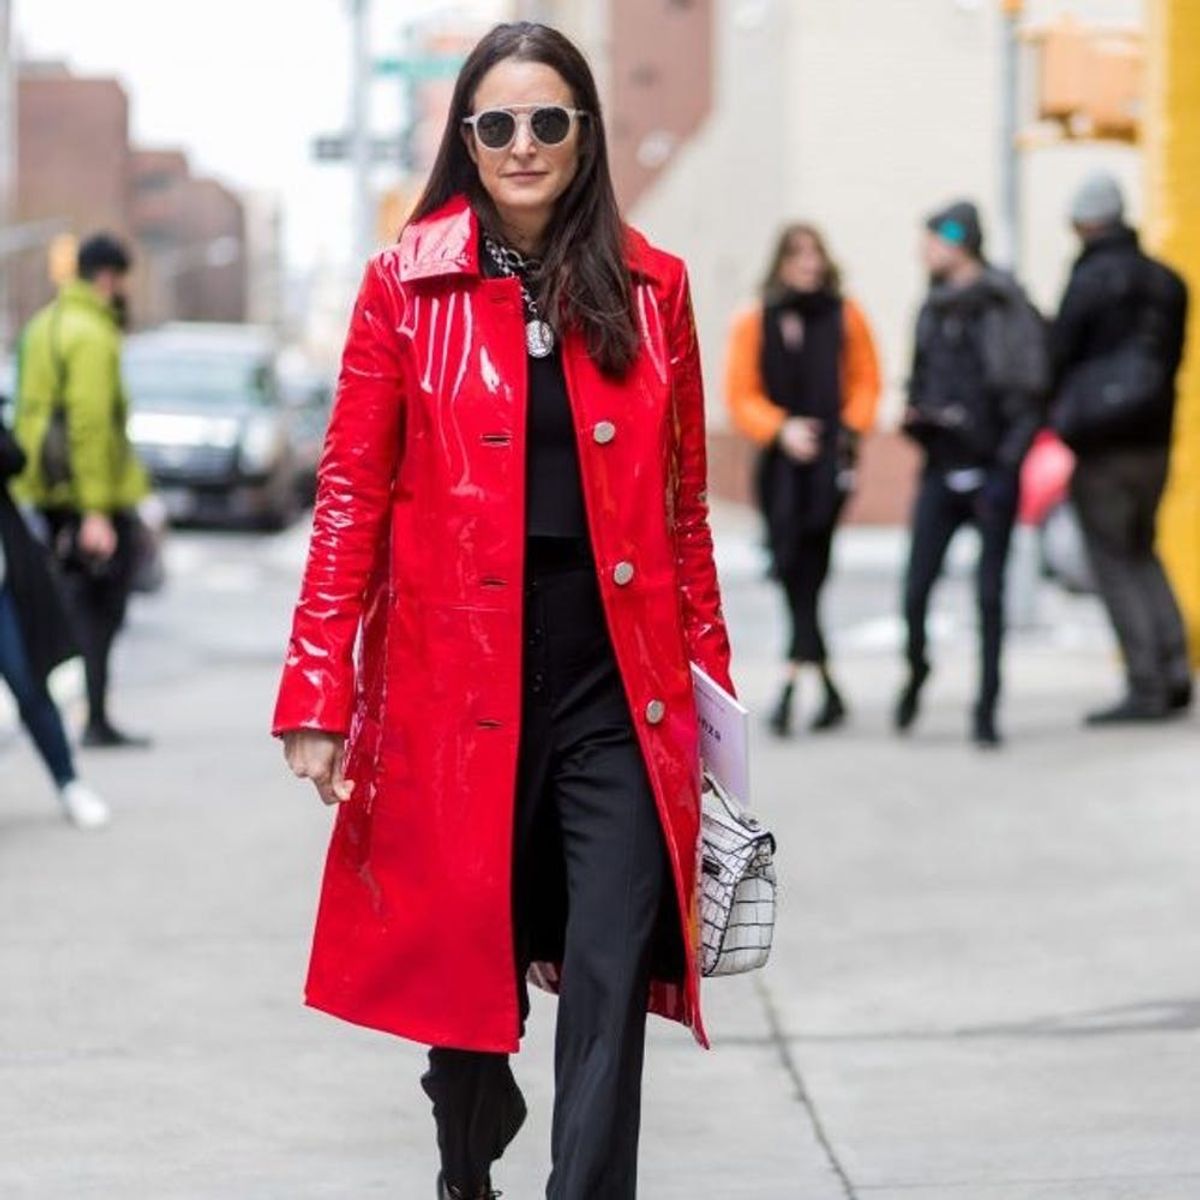 15 Reasons Why Red Is the Must-Have Color RN